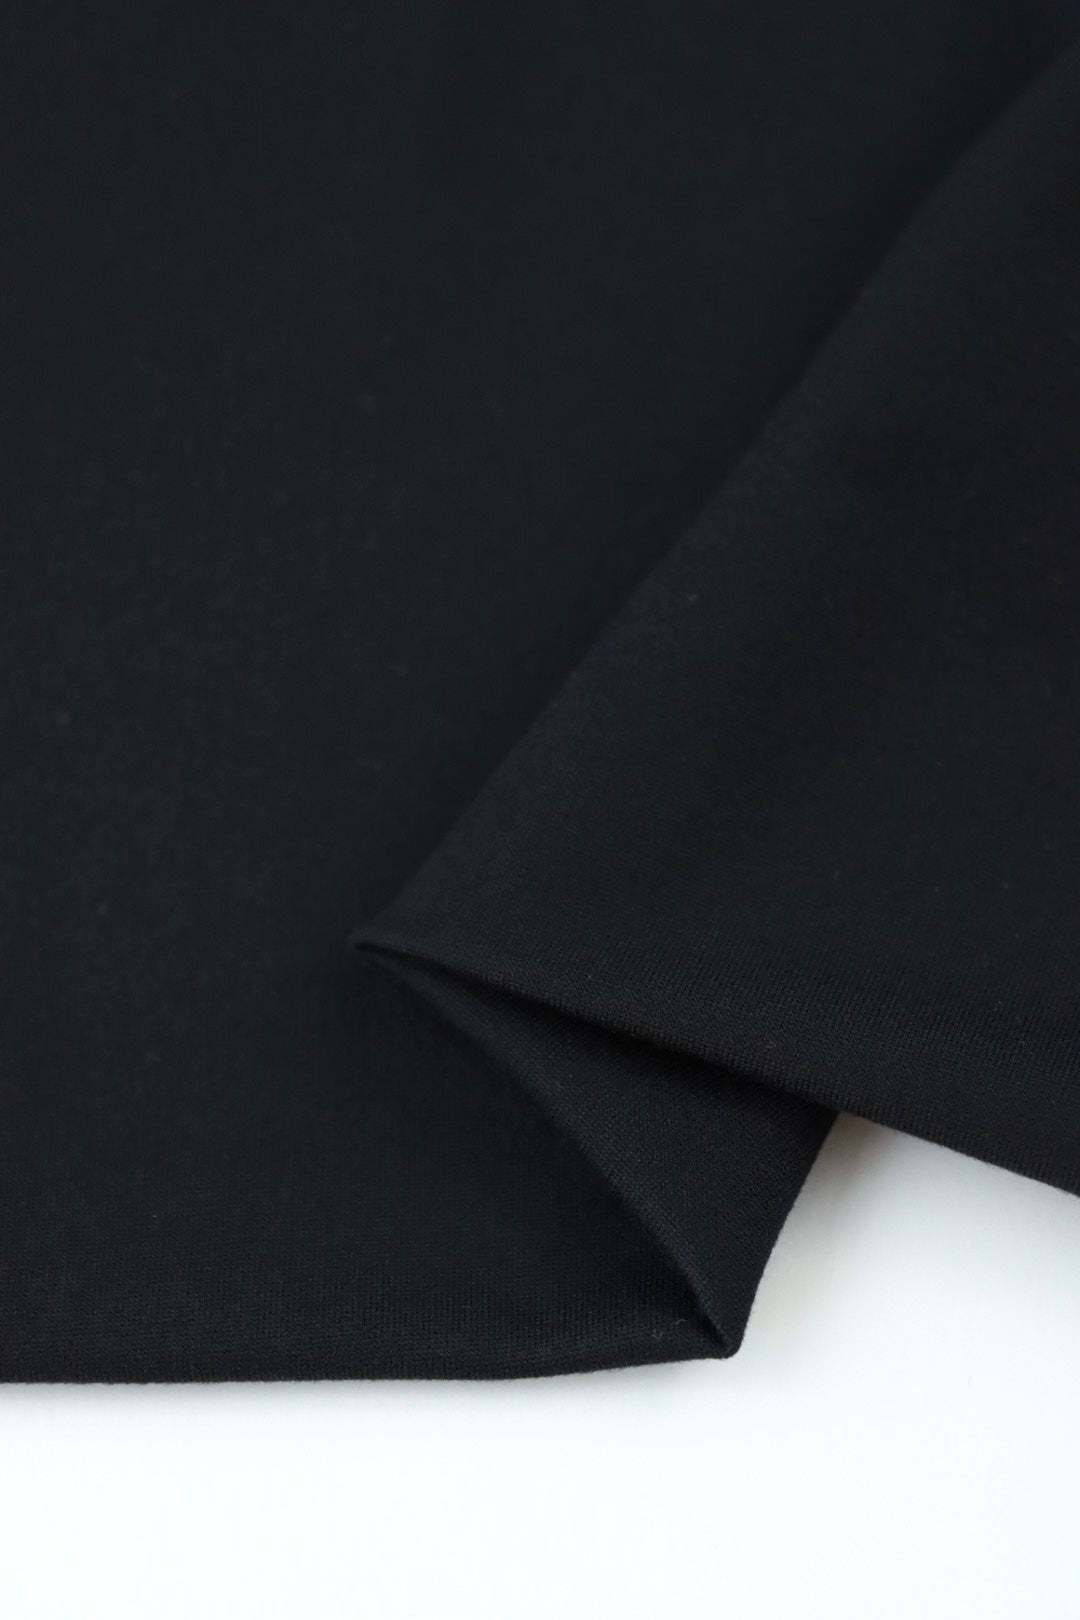 Black Dricloth Microfiber Jersey Fabric Athletic Polyester Spandex 60 Wide  Stretch Sold BTY 